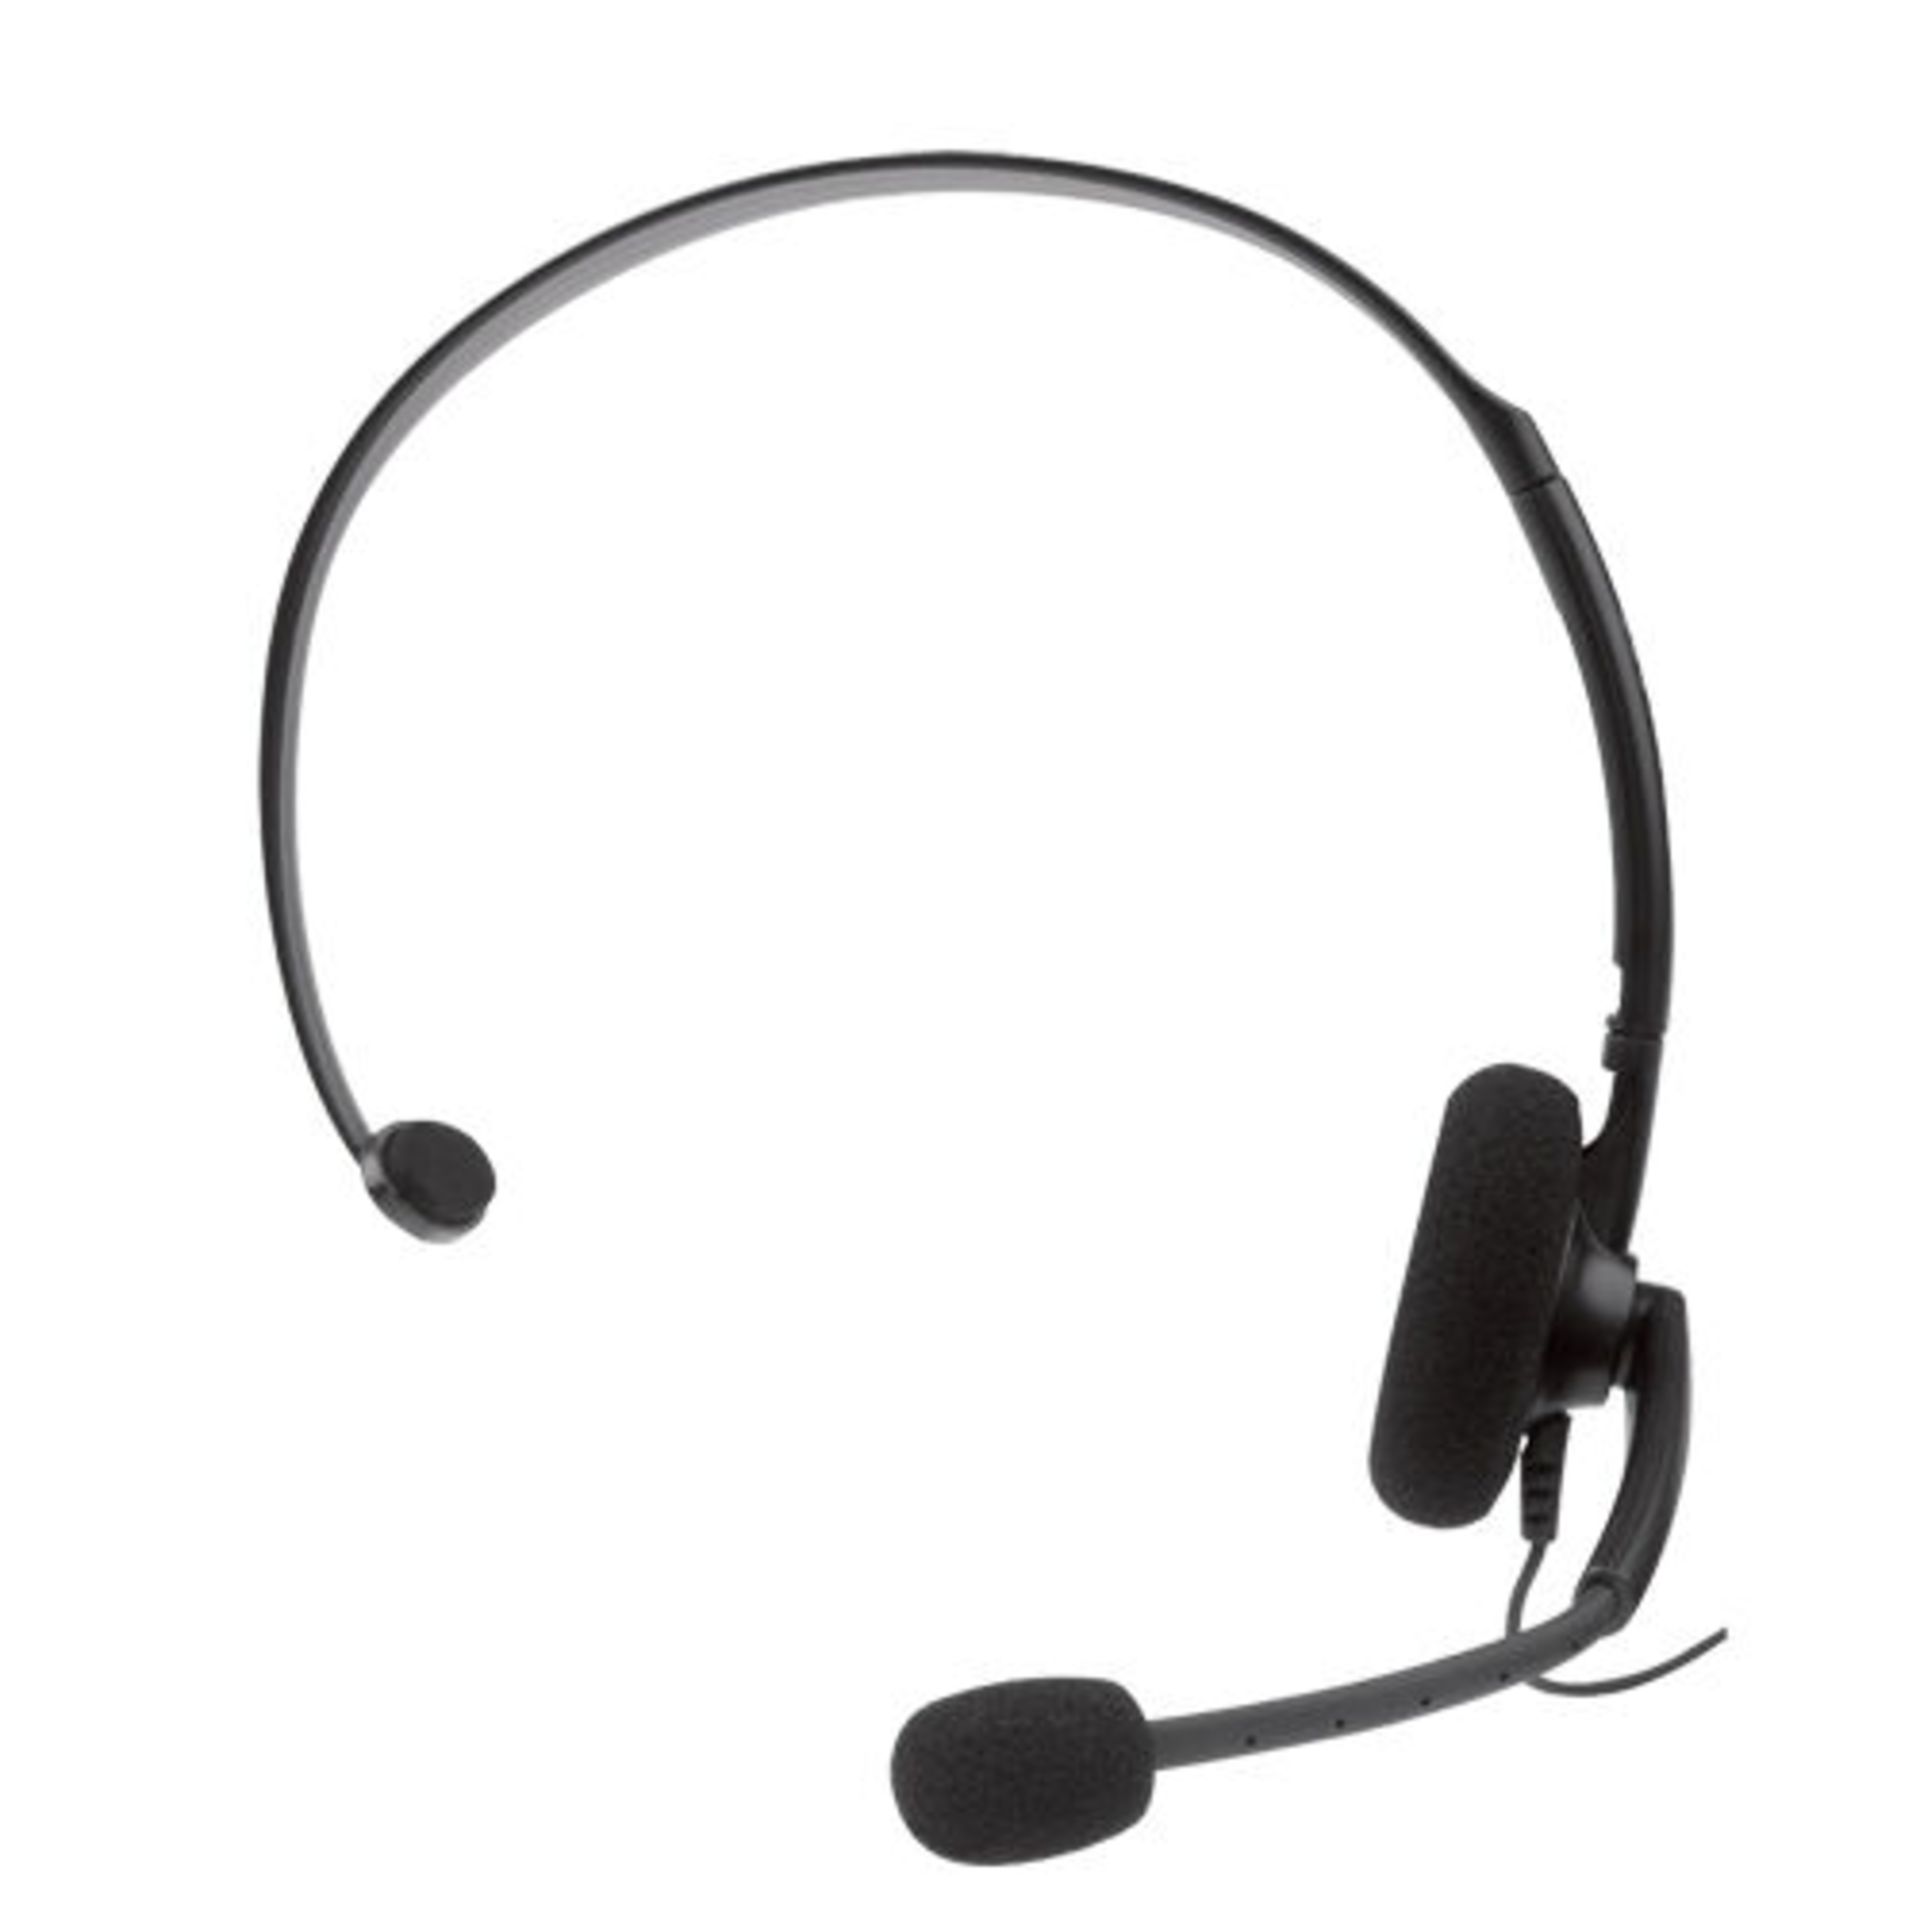 JOBLOT 100 X NEW OFFICIAL XBOX LIVE ONLINE CHAT HEADSET WITH MIC GAMING HEADPHONES 2.5MM AUX - Image 5 of 7